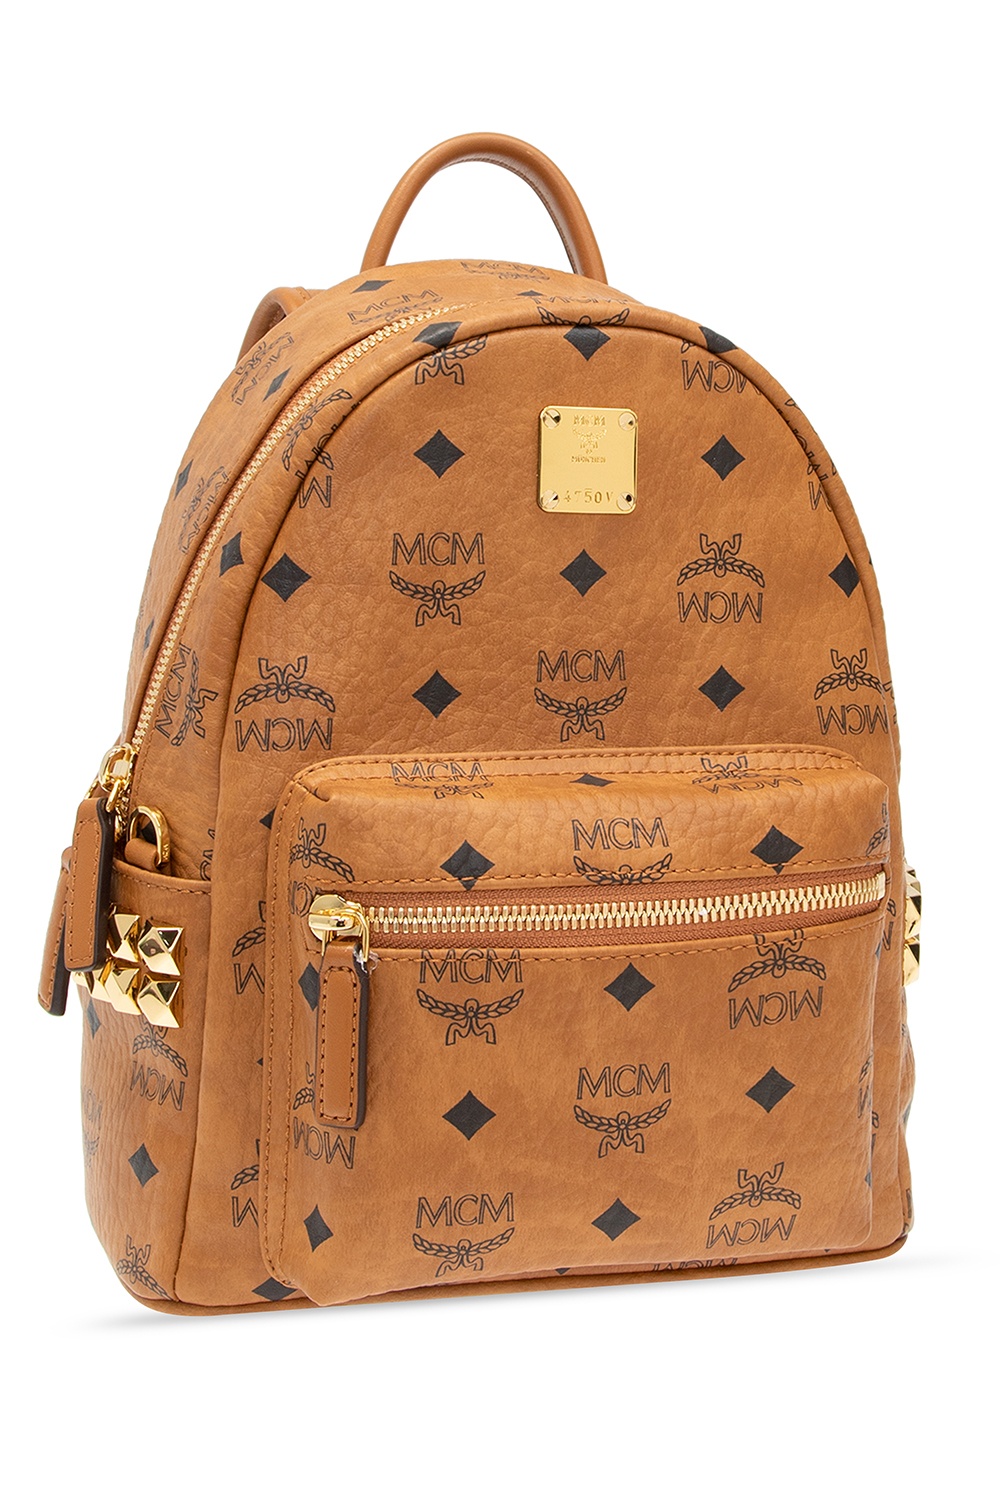 MCM Backpack with logo | Women's Bags | Vitkac